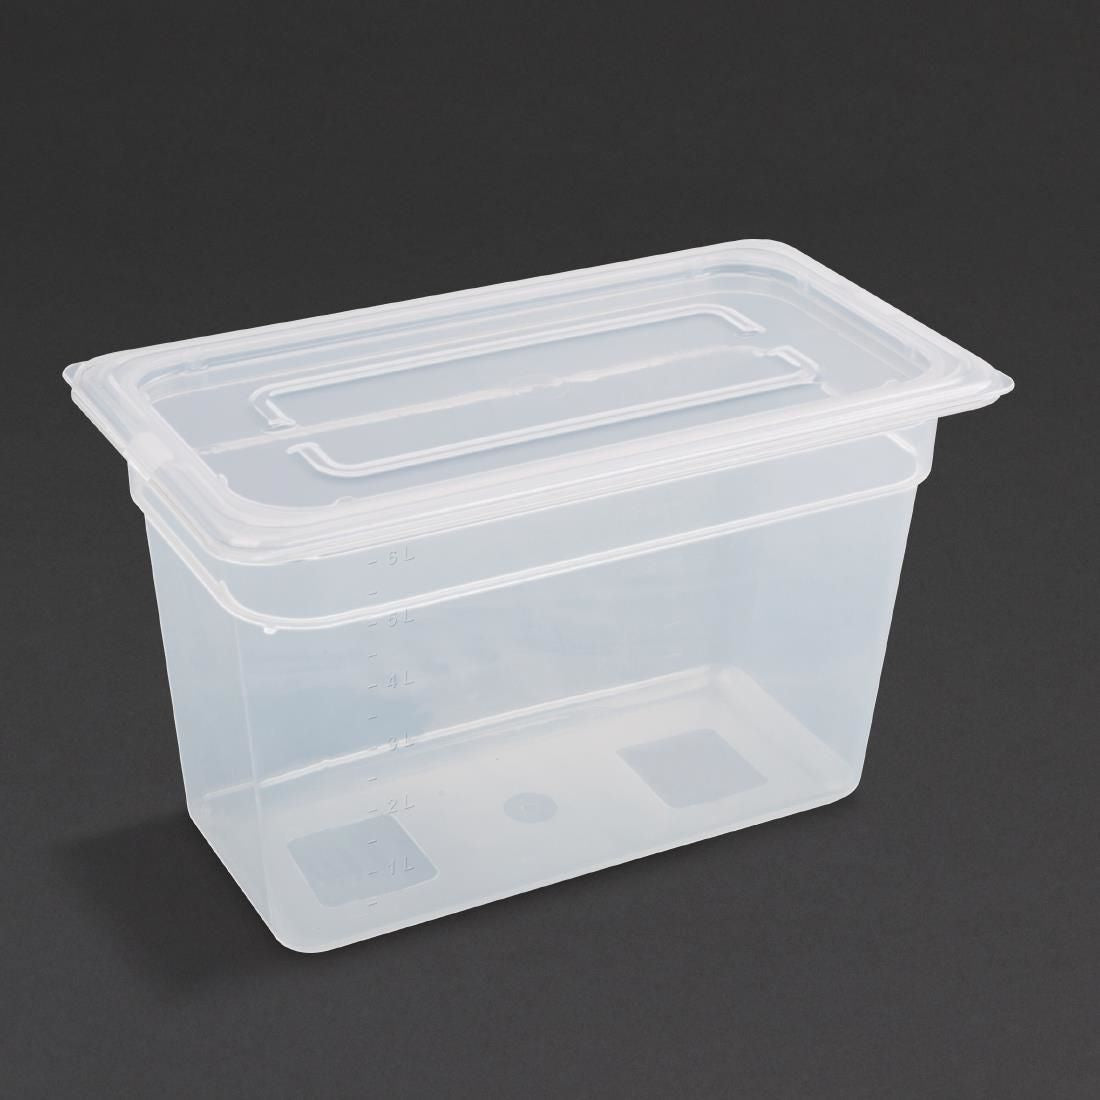 GJ521 Vogue Polypropylene 1/3 Gastronorm Container with Lid 200mm (Pack of 4) JD Catering Equipment Solutions Ltd